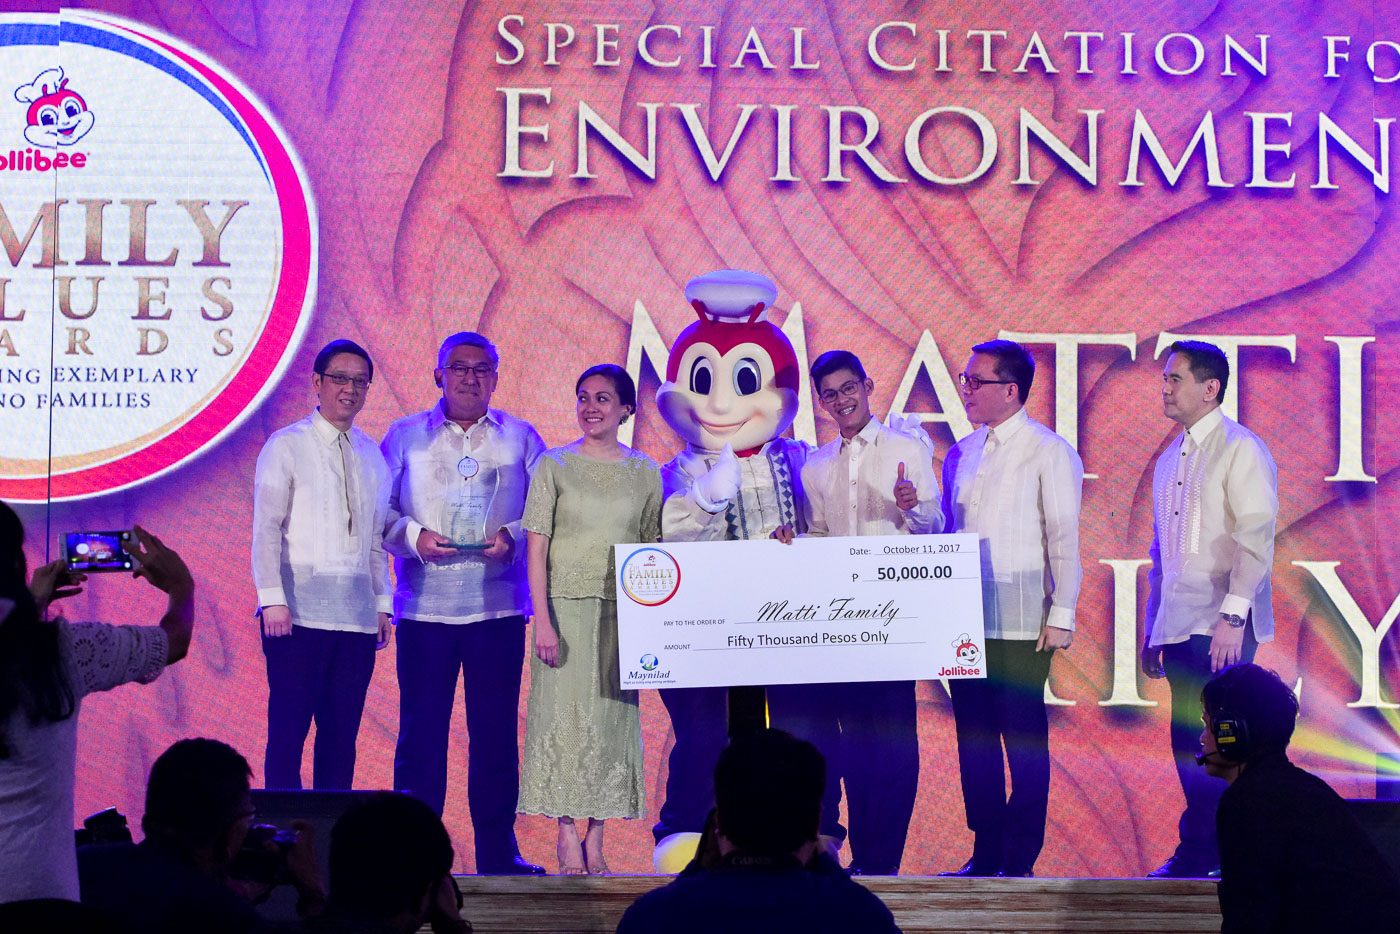 The 7th Jollibee Family Values Awards at the Crowne Plaza Hotel on October 11, 2017 